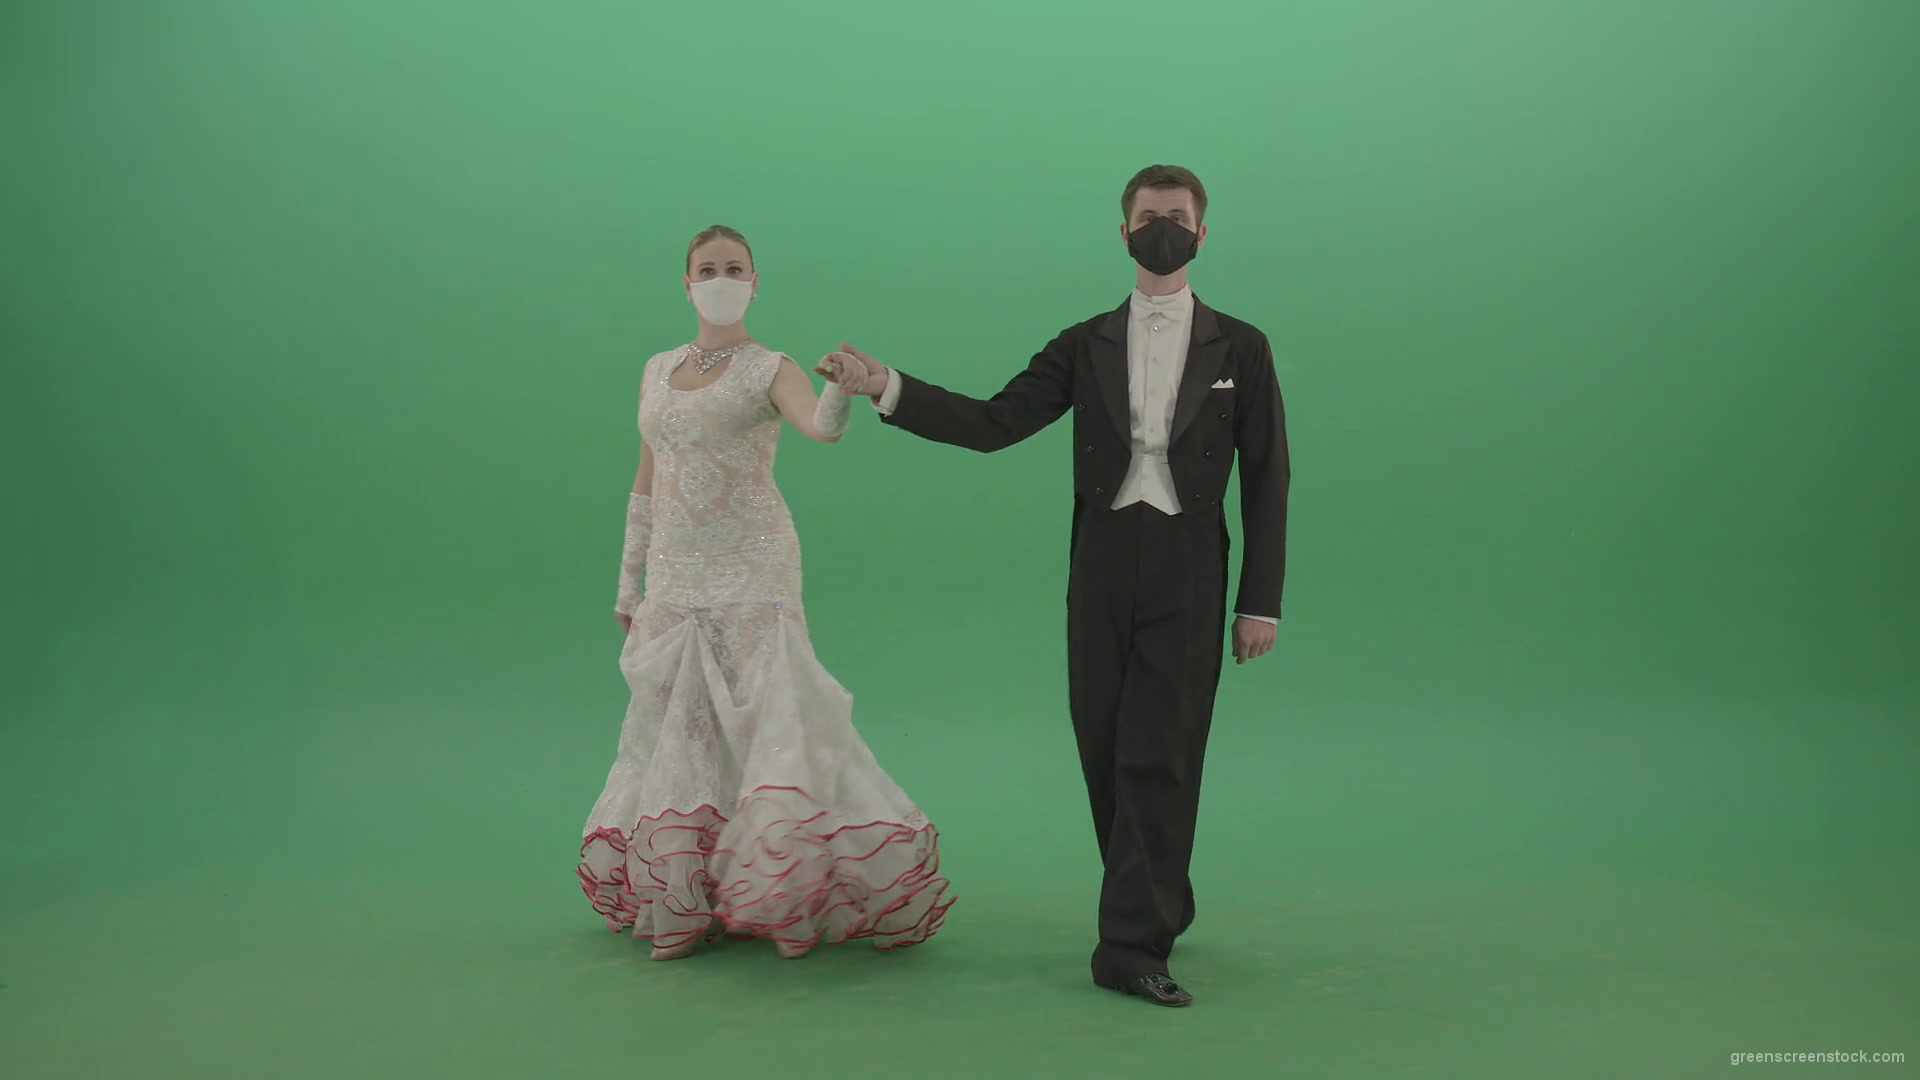 Ballroom-Dancers-Man-and-Woman-making-bowing-regards-and-welcome-Corona-Virus-on-green-screen-4K-Video-Footage-1920_005 Green Screen Stock